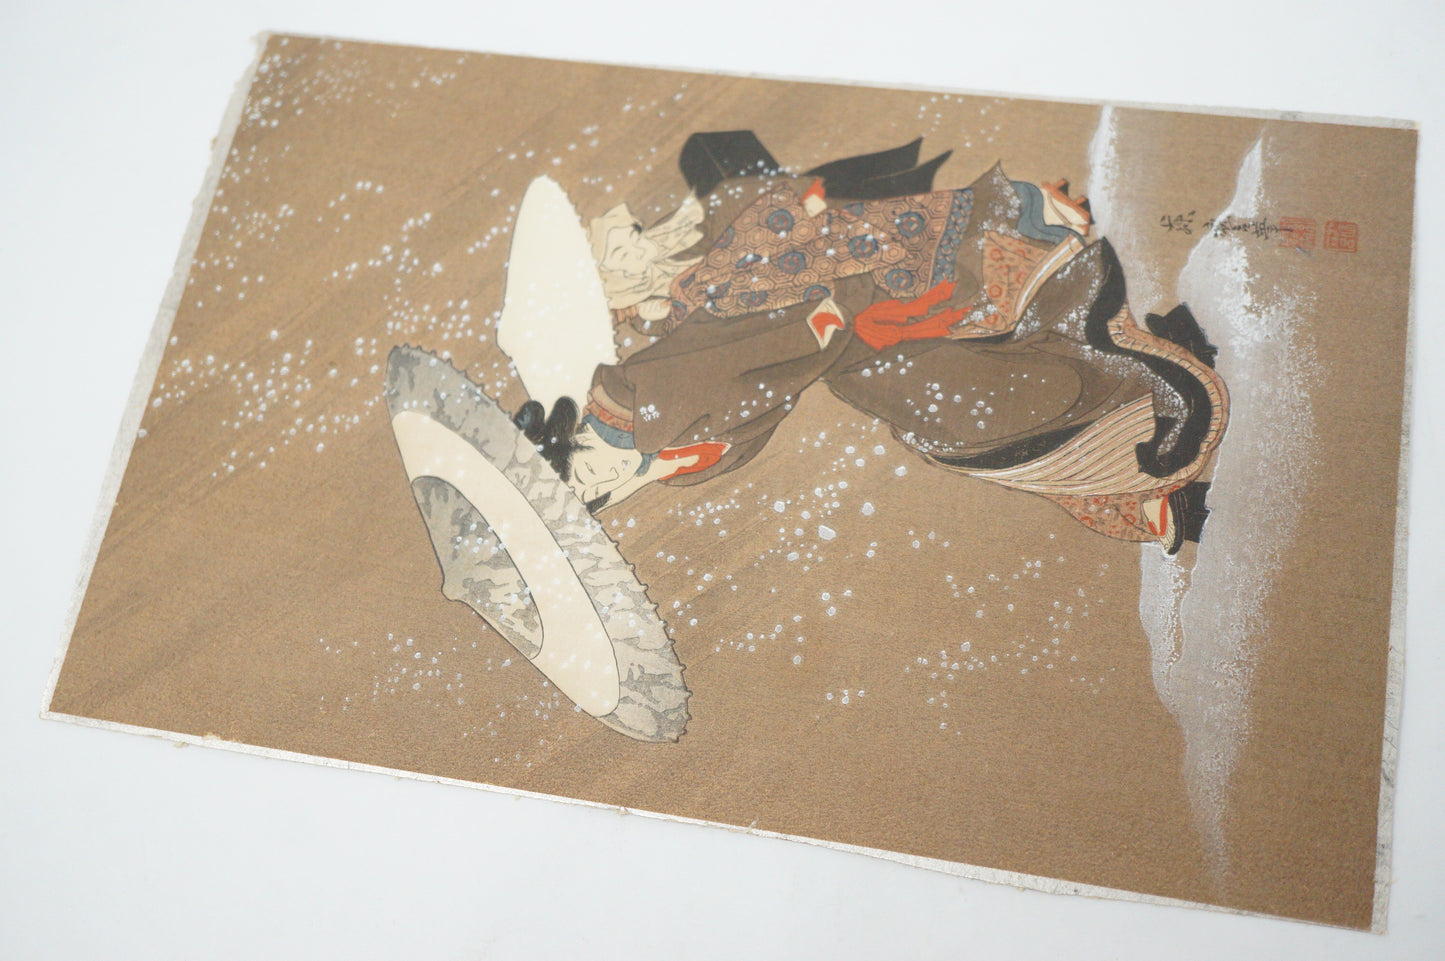 Japanese Woodblock Print -Outing in The Snow Storm- by Kitagawa Fujimaro 0105E8